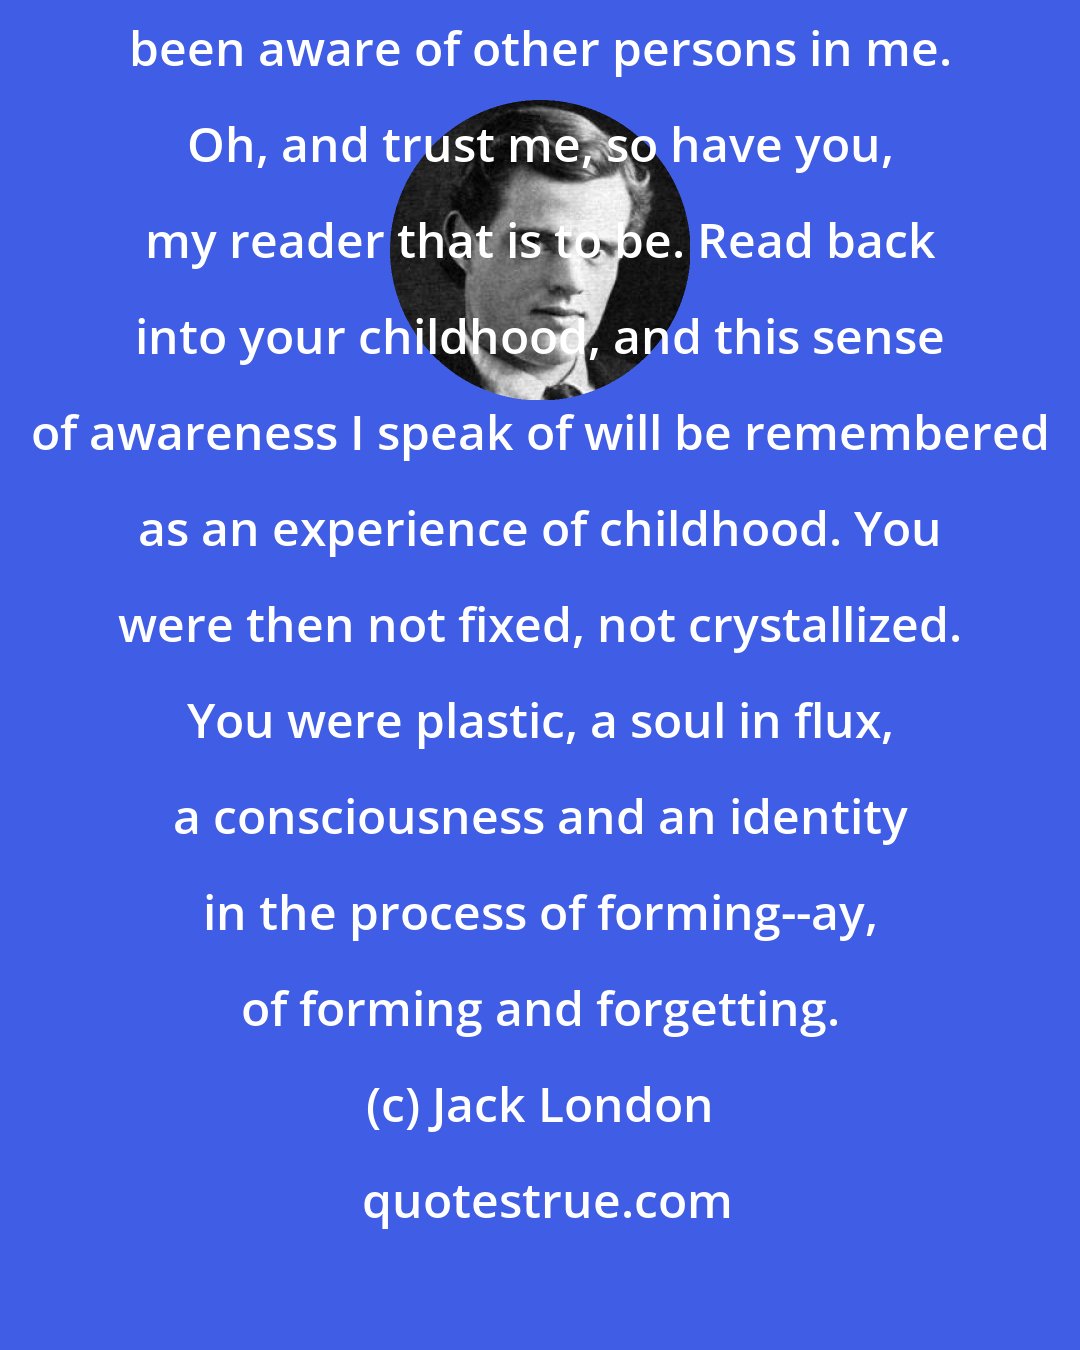 Jack London: All my life I have had an awareness of other times and places. I have been aware of other persons in me. Oh, and trust me, so have you, my reader that is to be. Read back into your childhood, and this sense of awareness I speak of will be remembered as an experience of childhood. You were then not fixed, not crystallized. You were plastic, a soul in flux, a consciousness and an identity in the process of forming--ay, of forming and forgetting.